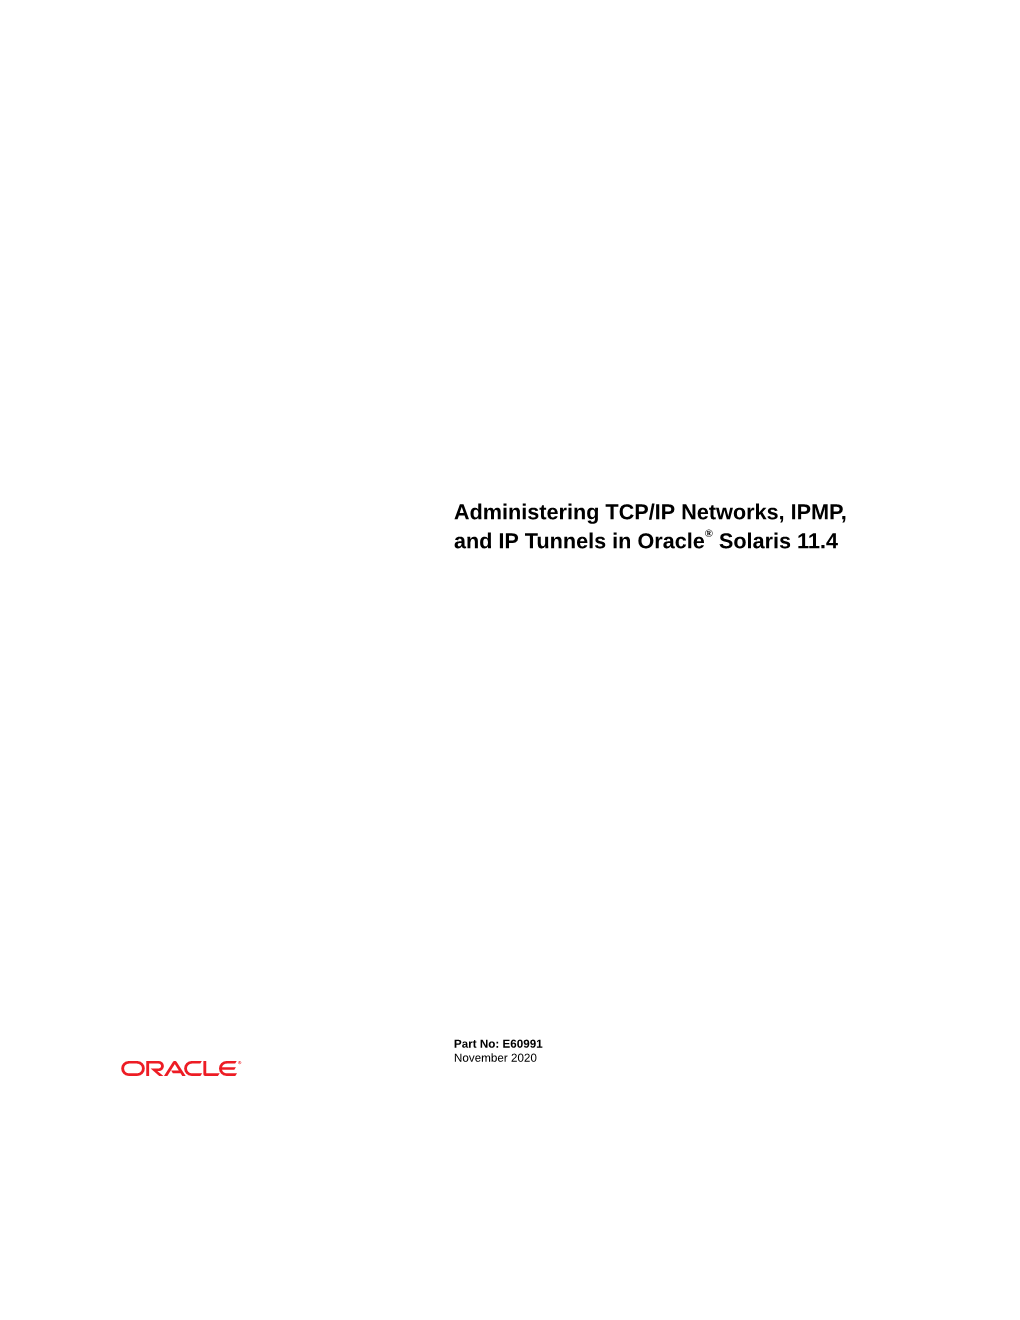 Administering TCP/IP Networks, IPMP, and IP Tunnels in Oracle Solaris 11.4 Part No: E60991 Copyright © 2011, 2020, Oracle And/Or Its Affiliates